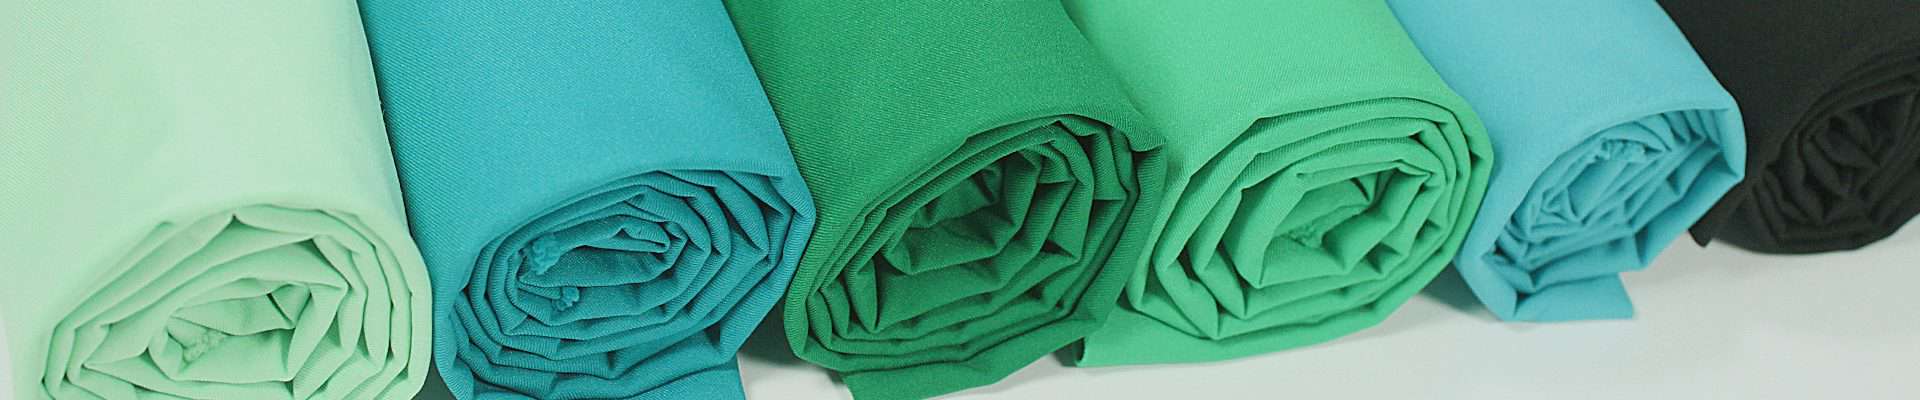 100 Polyester 3 Layer Waterproof Breathable Fabric 4 Way Stretch